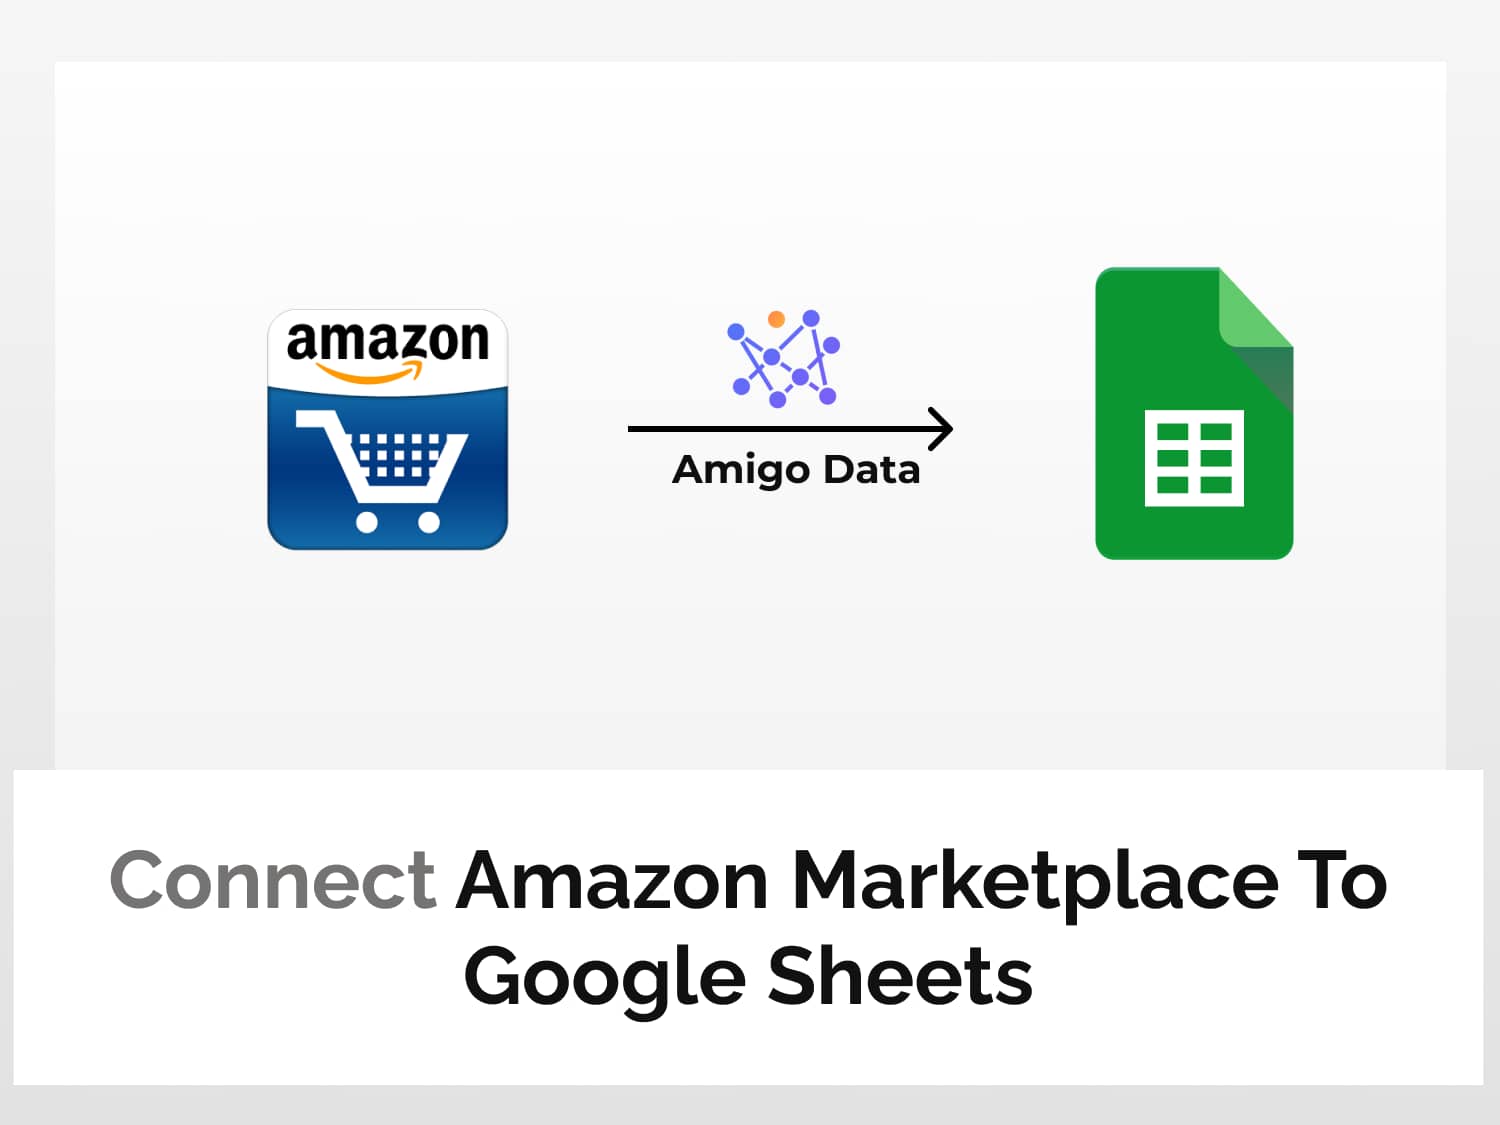 Connect Amazon Marketplace to Google Sheets